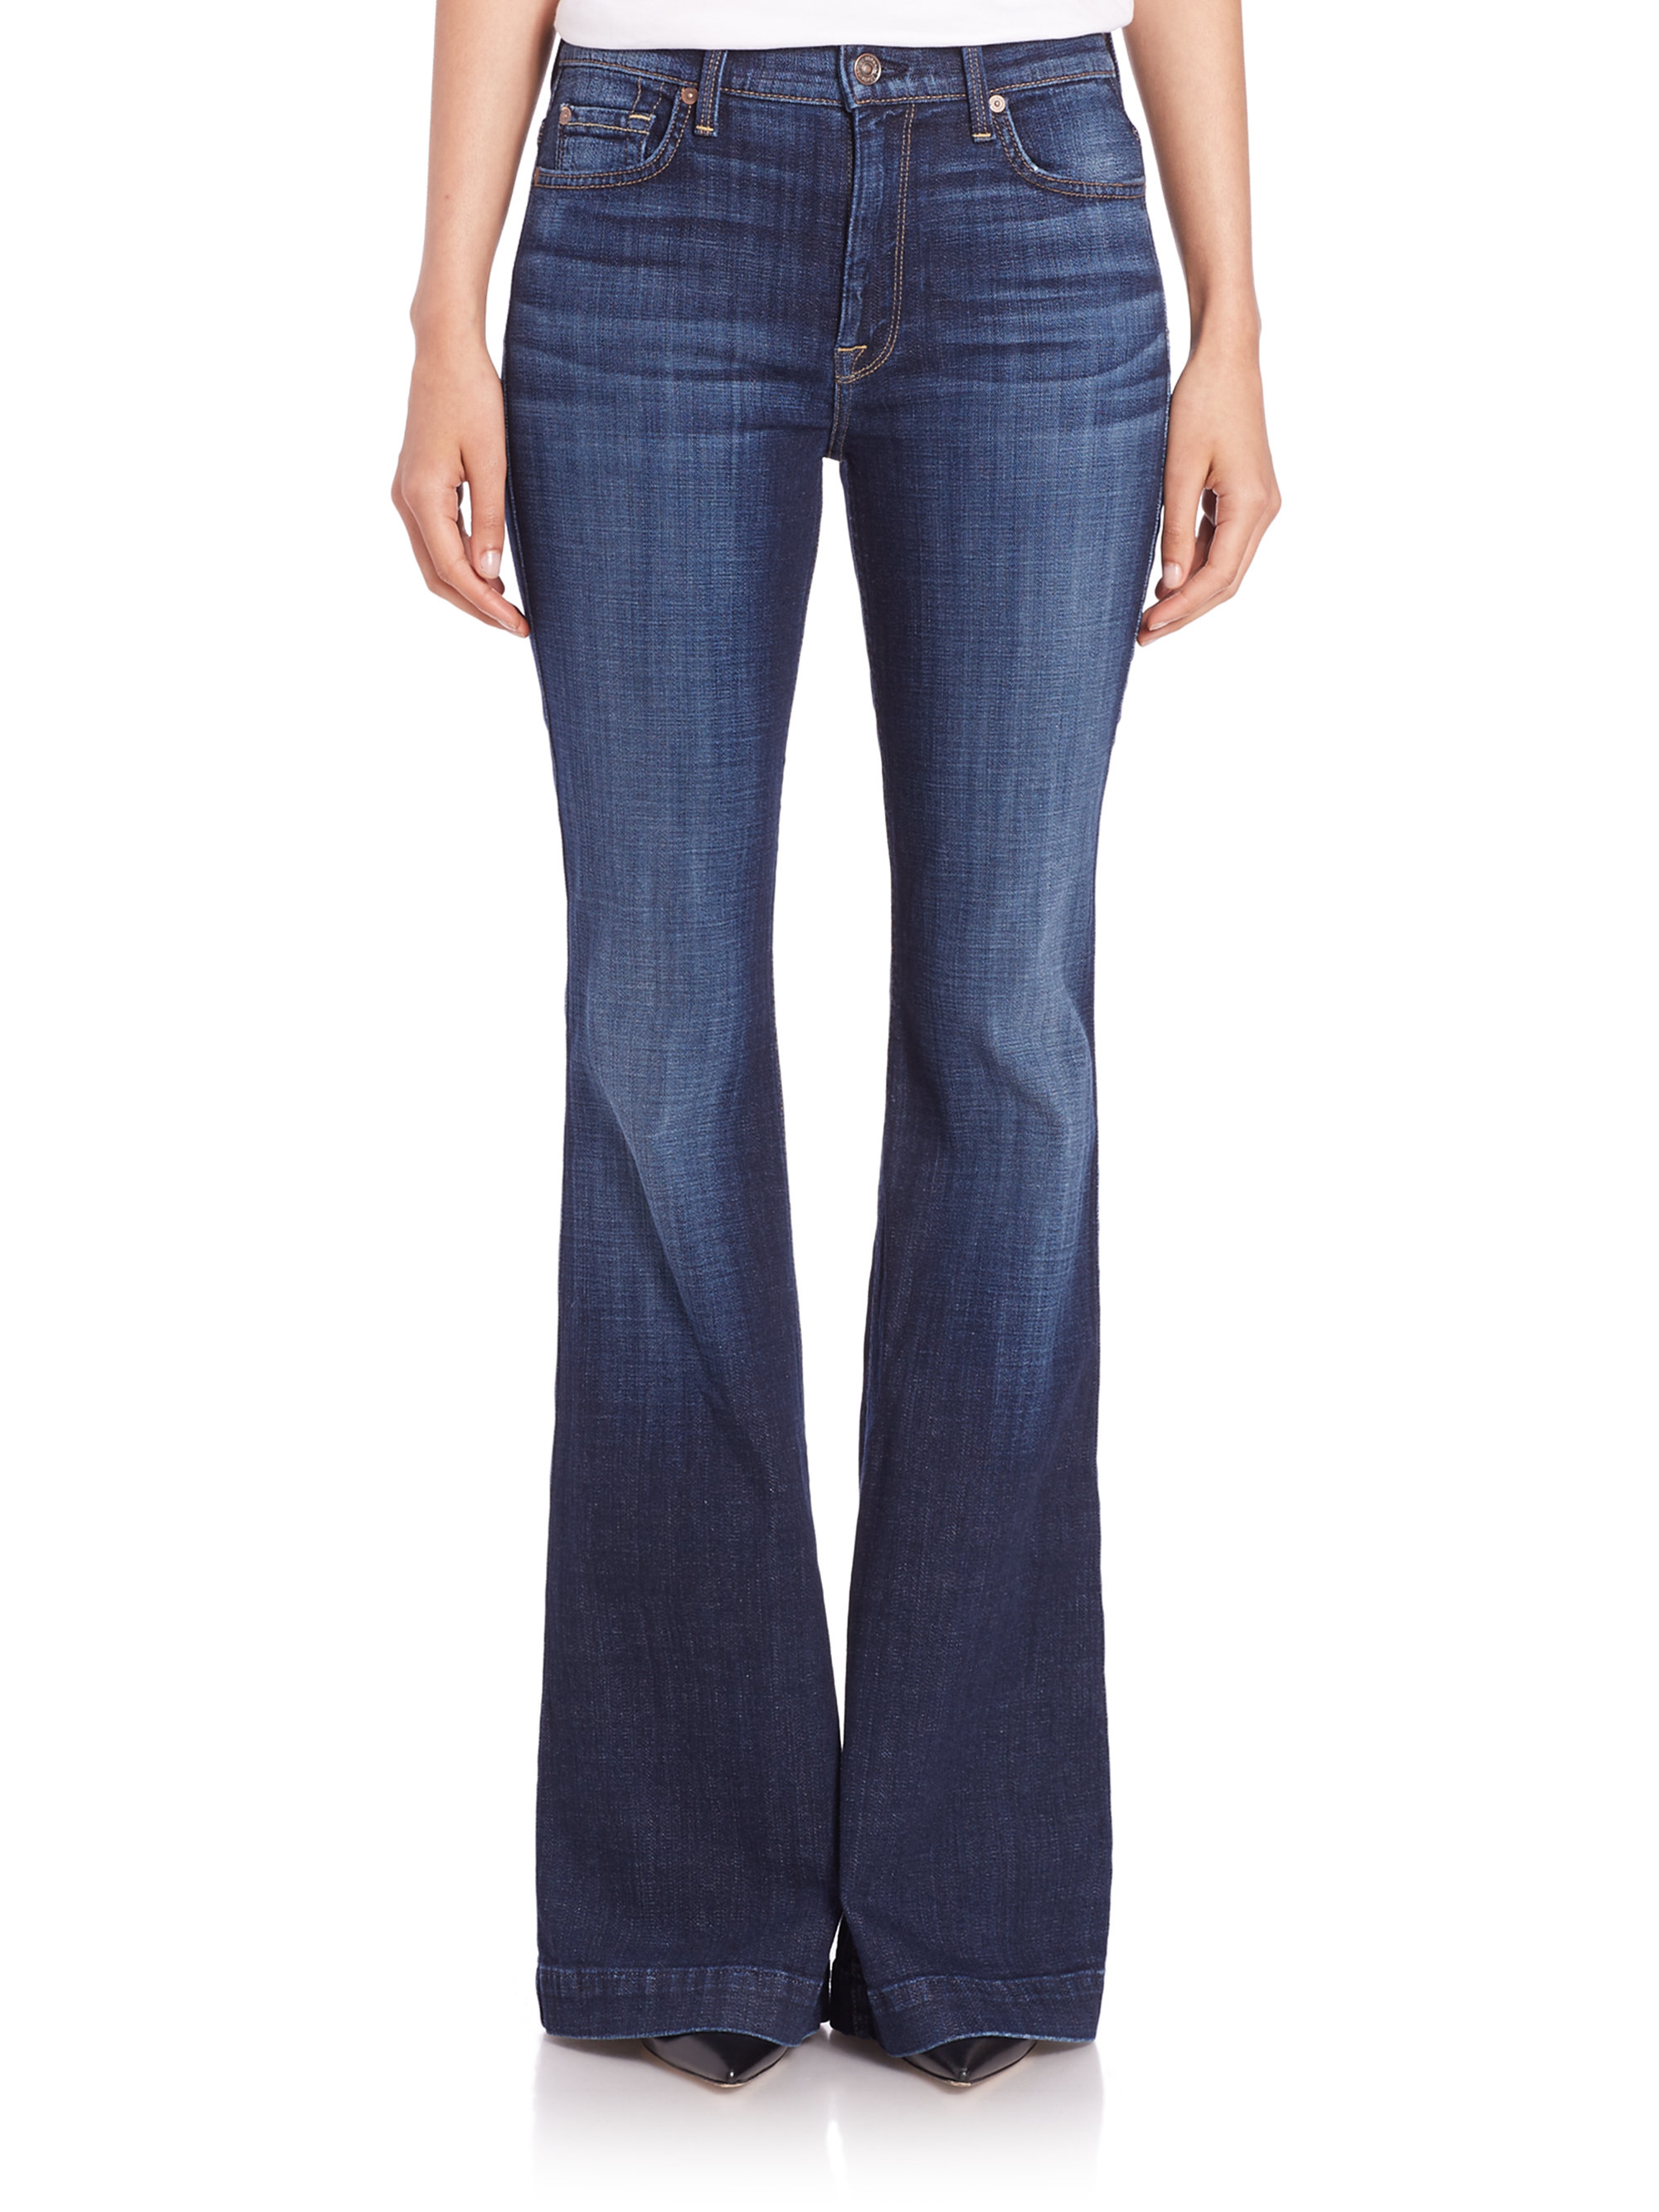 Lyst - 7 For All Mankind Ginger Distressed Tailorless Flared Jeans in Blue